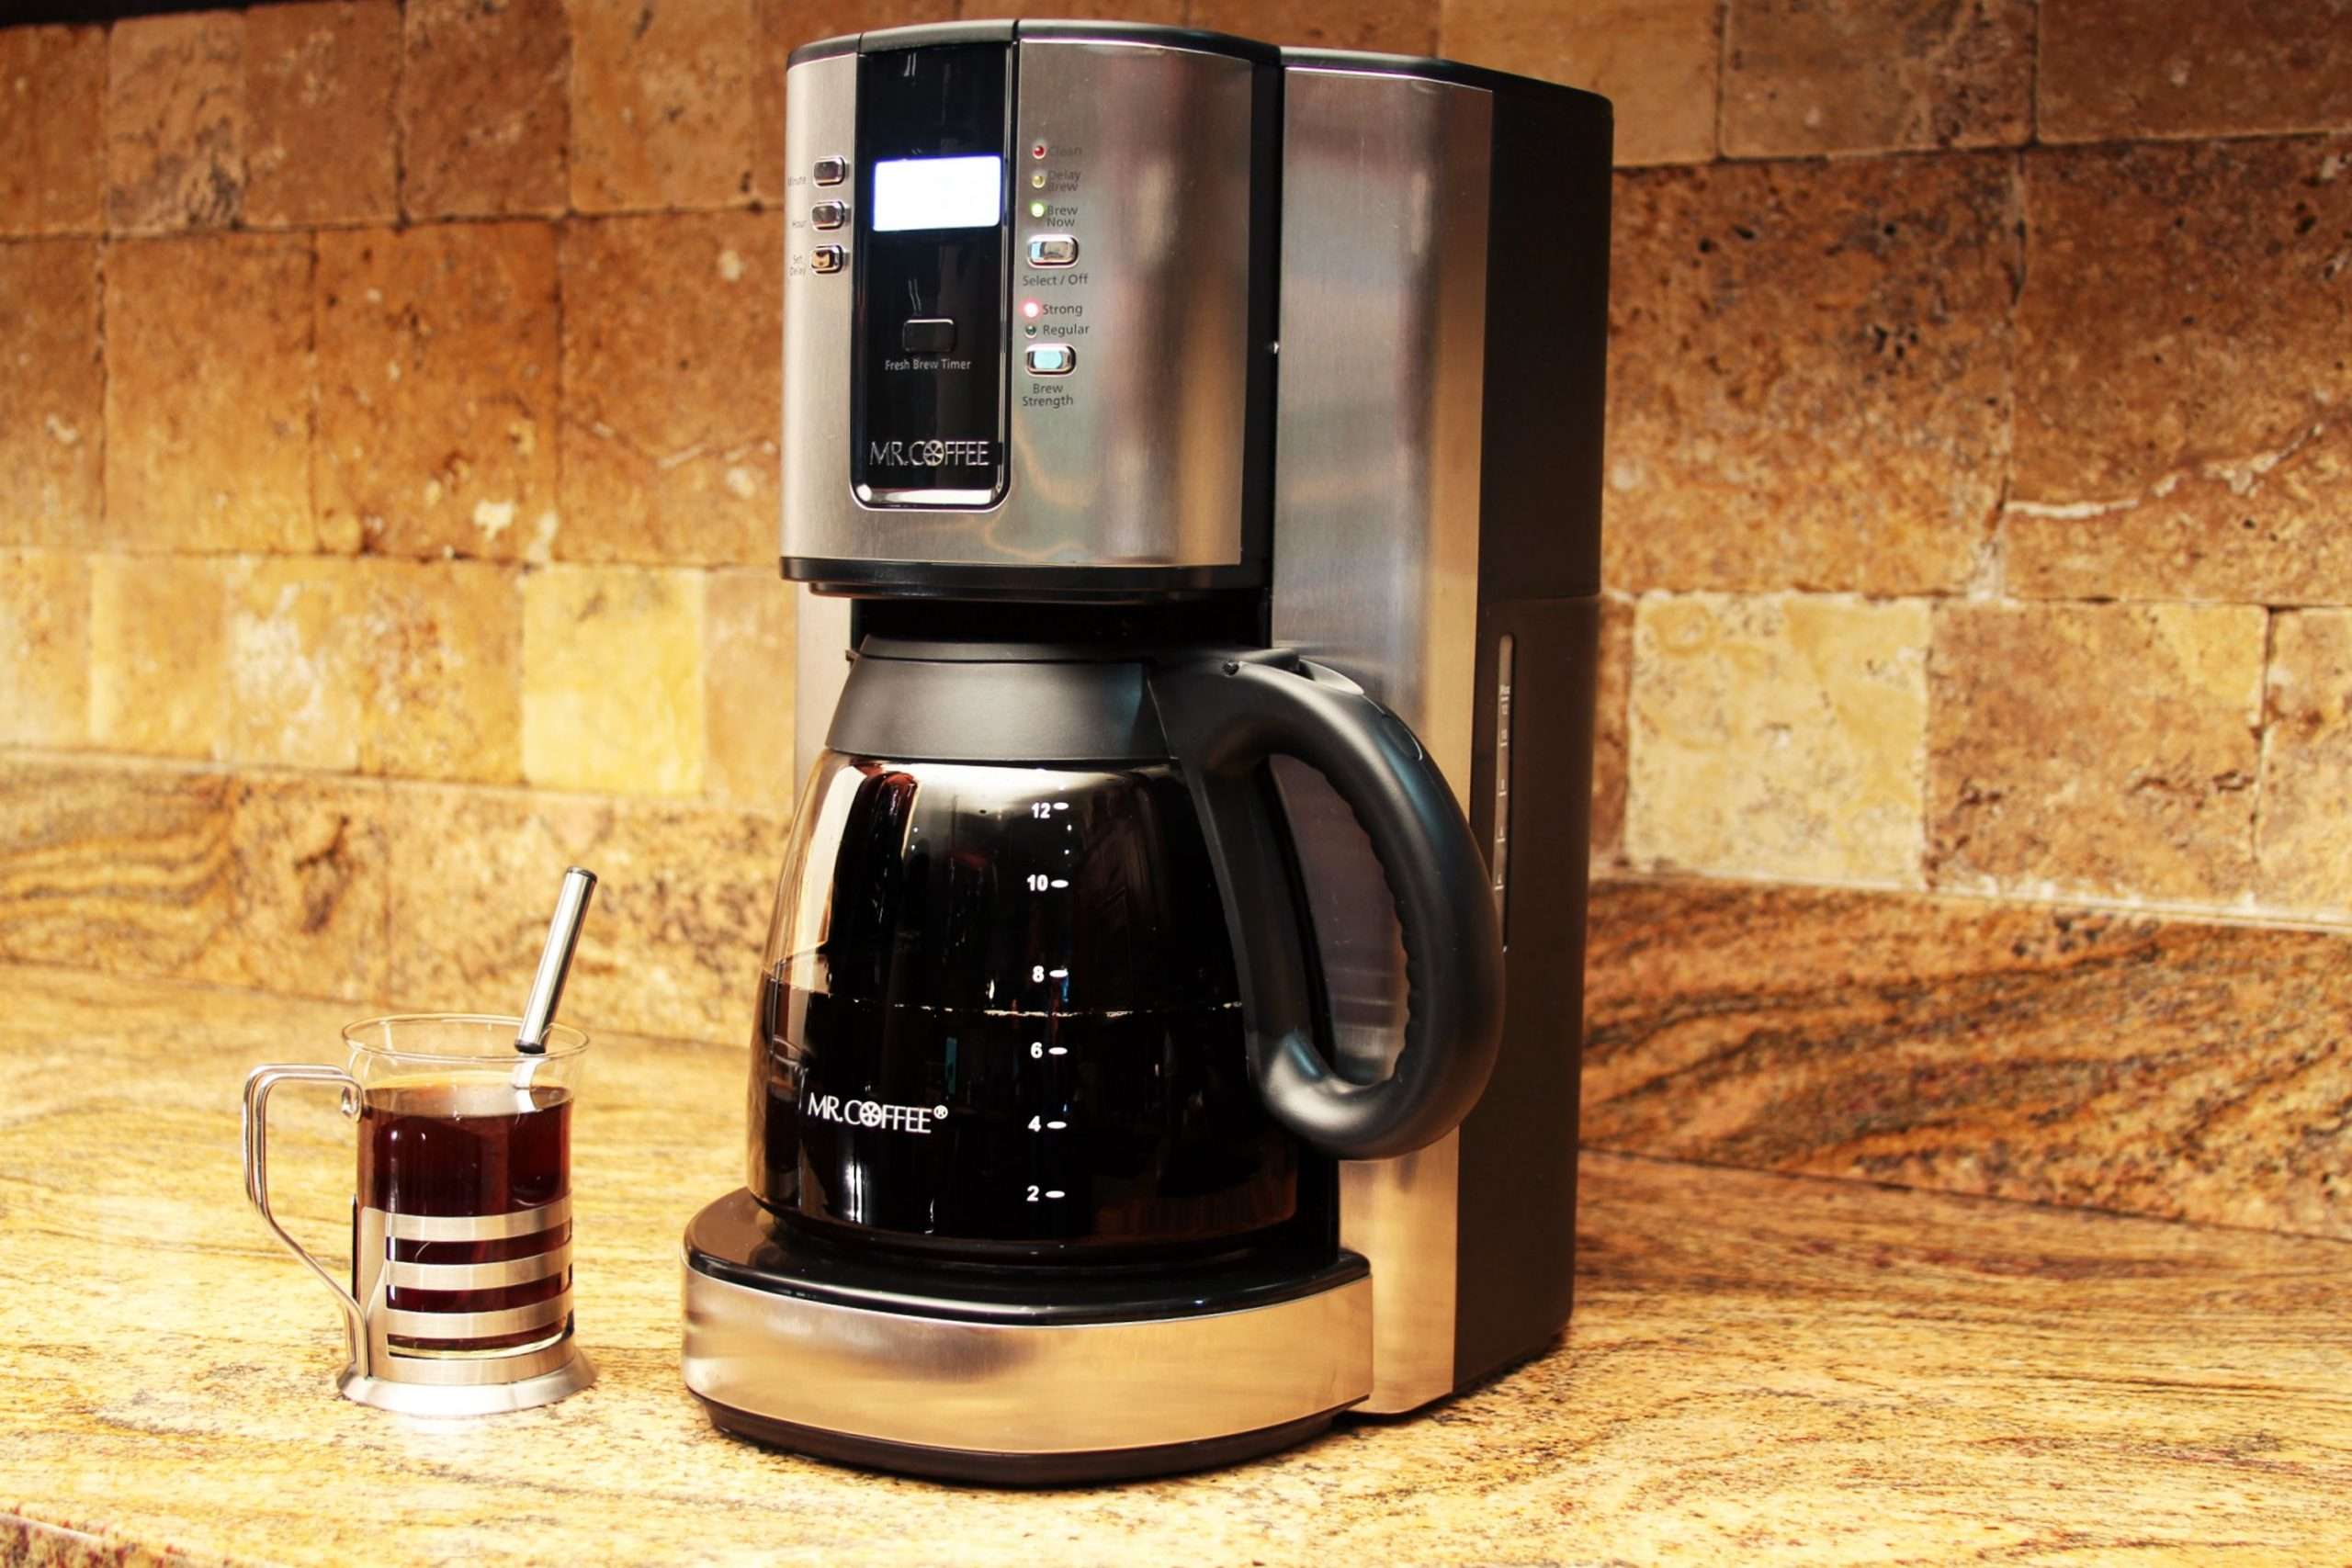 How to Clean a Mr. Coffee Maker